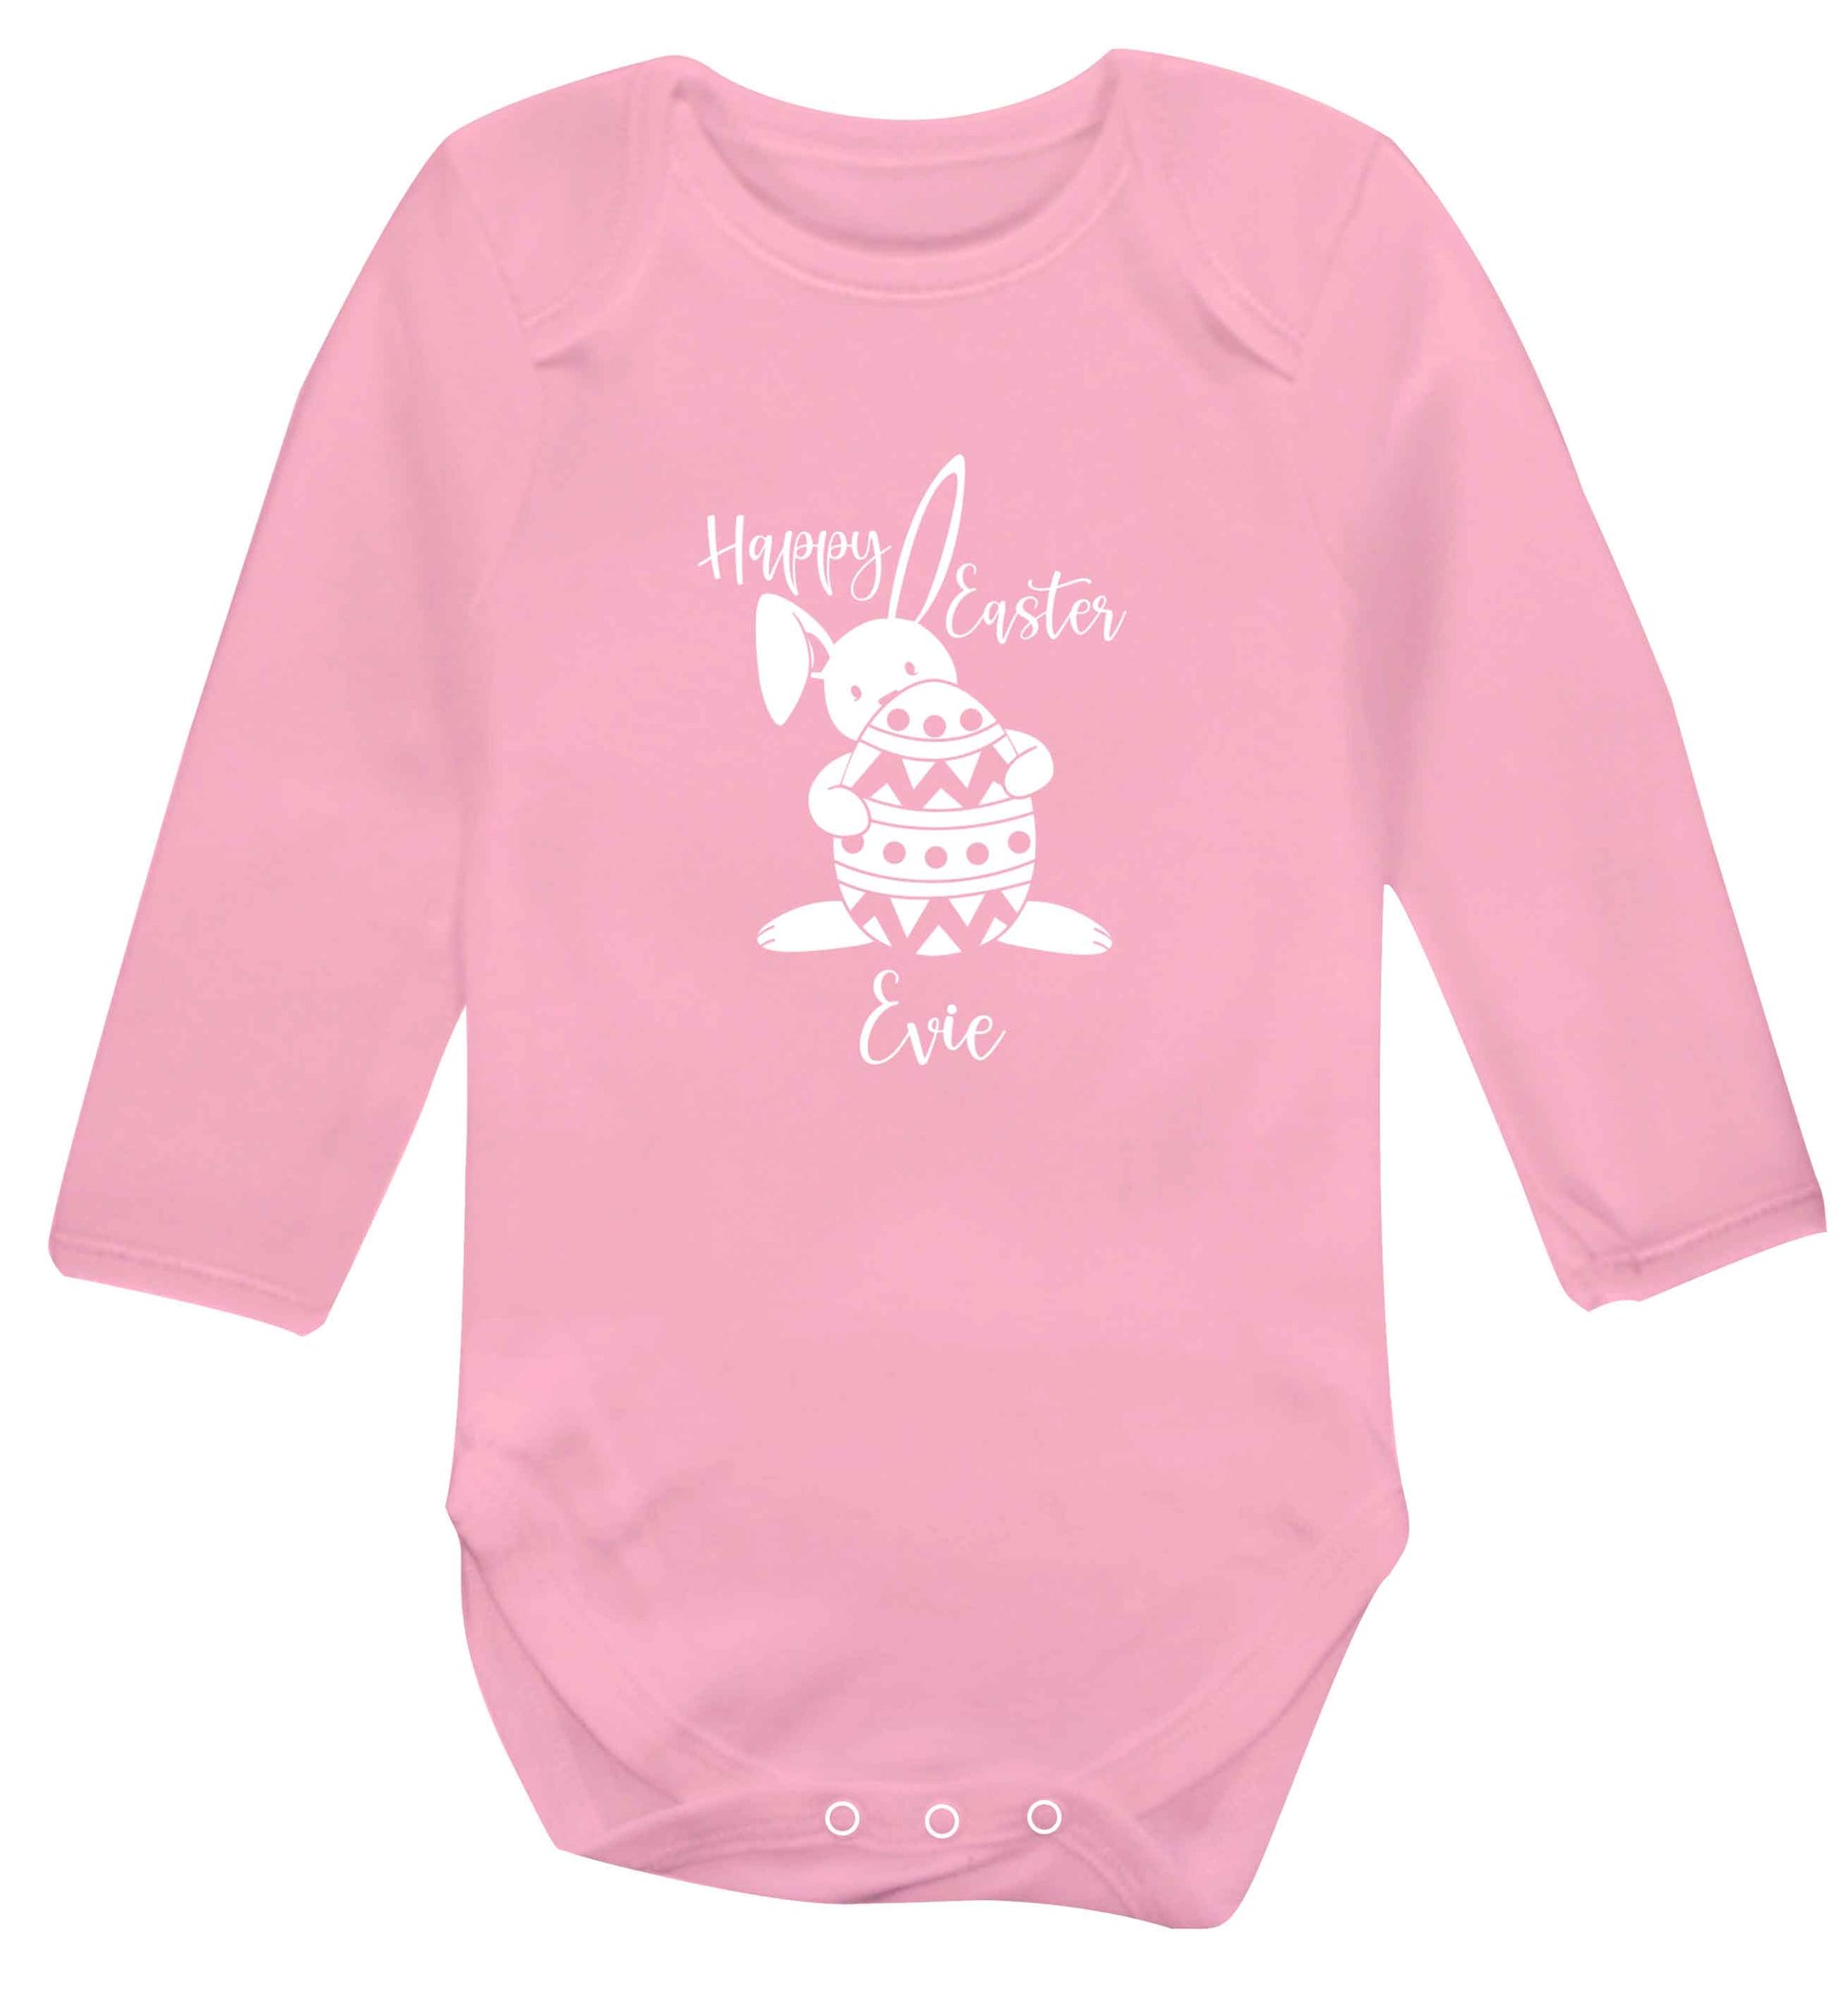 Happy Easter - personalised baby vest long sleeved pale pink 6-12 months